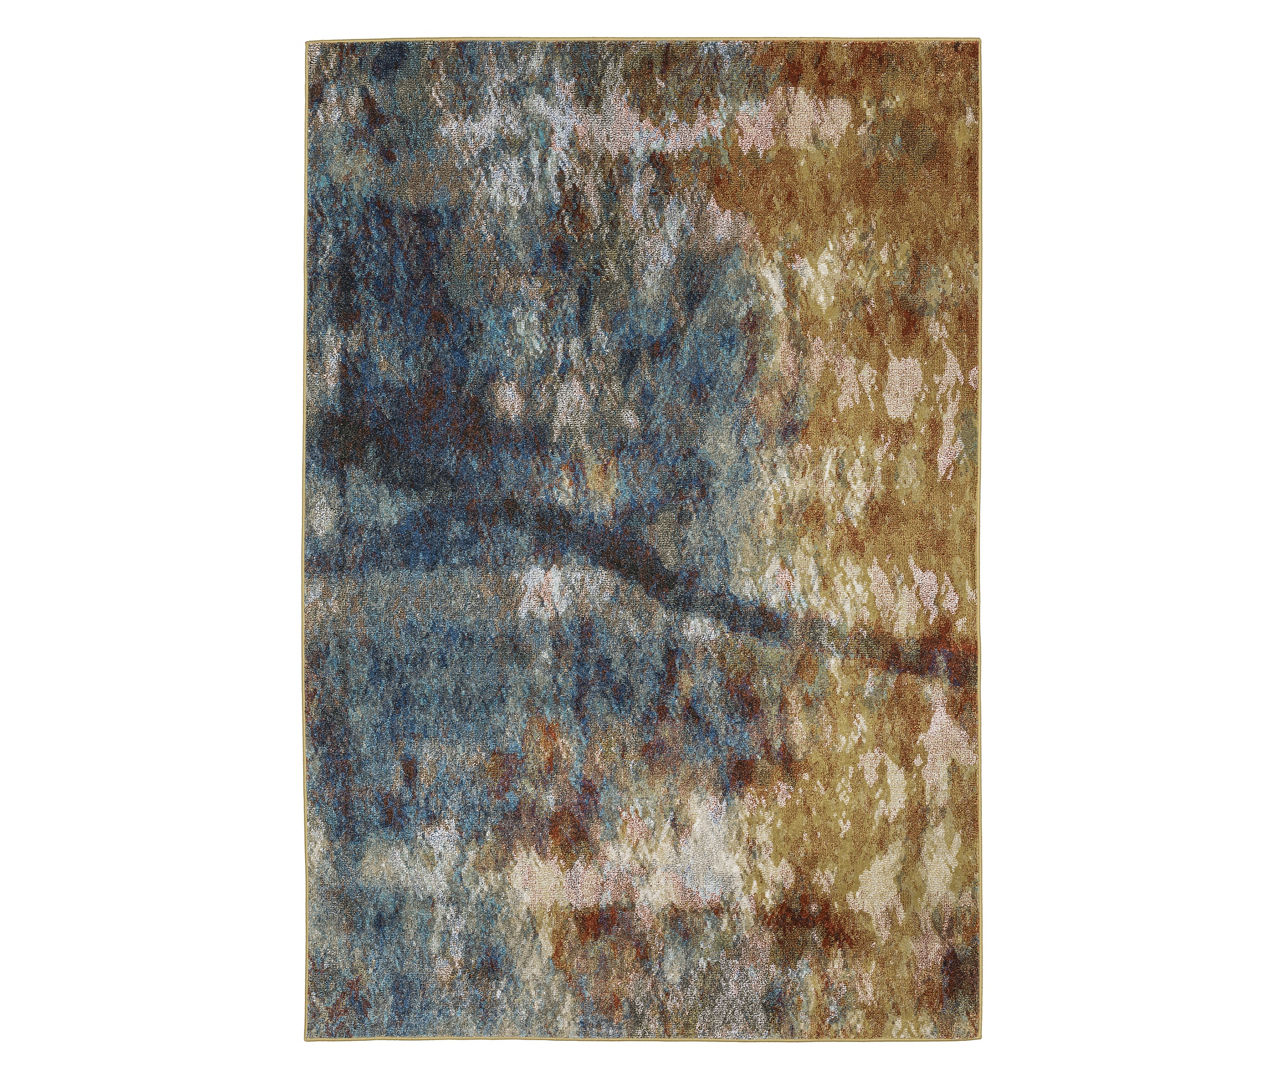 Velimeere Blue & Gold Abstract Area Rug, (9.1' x 12.1')